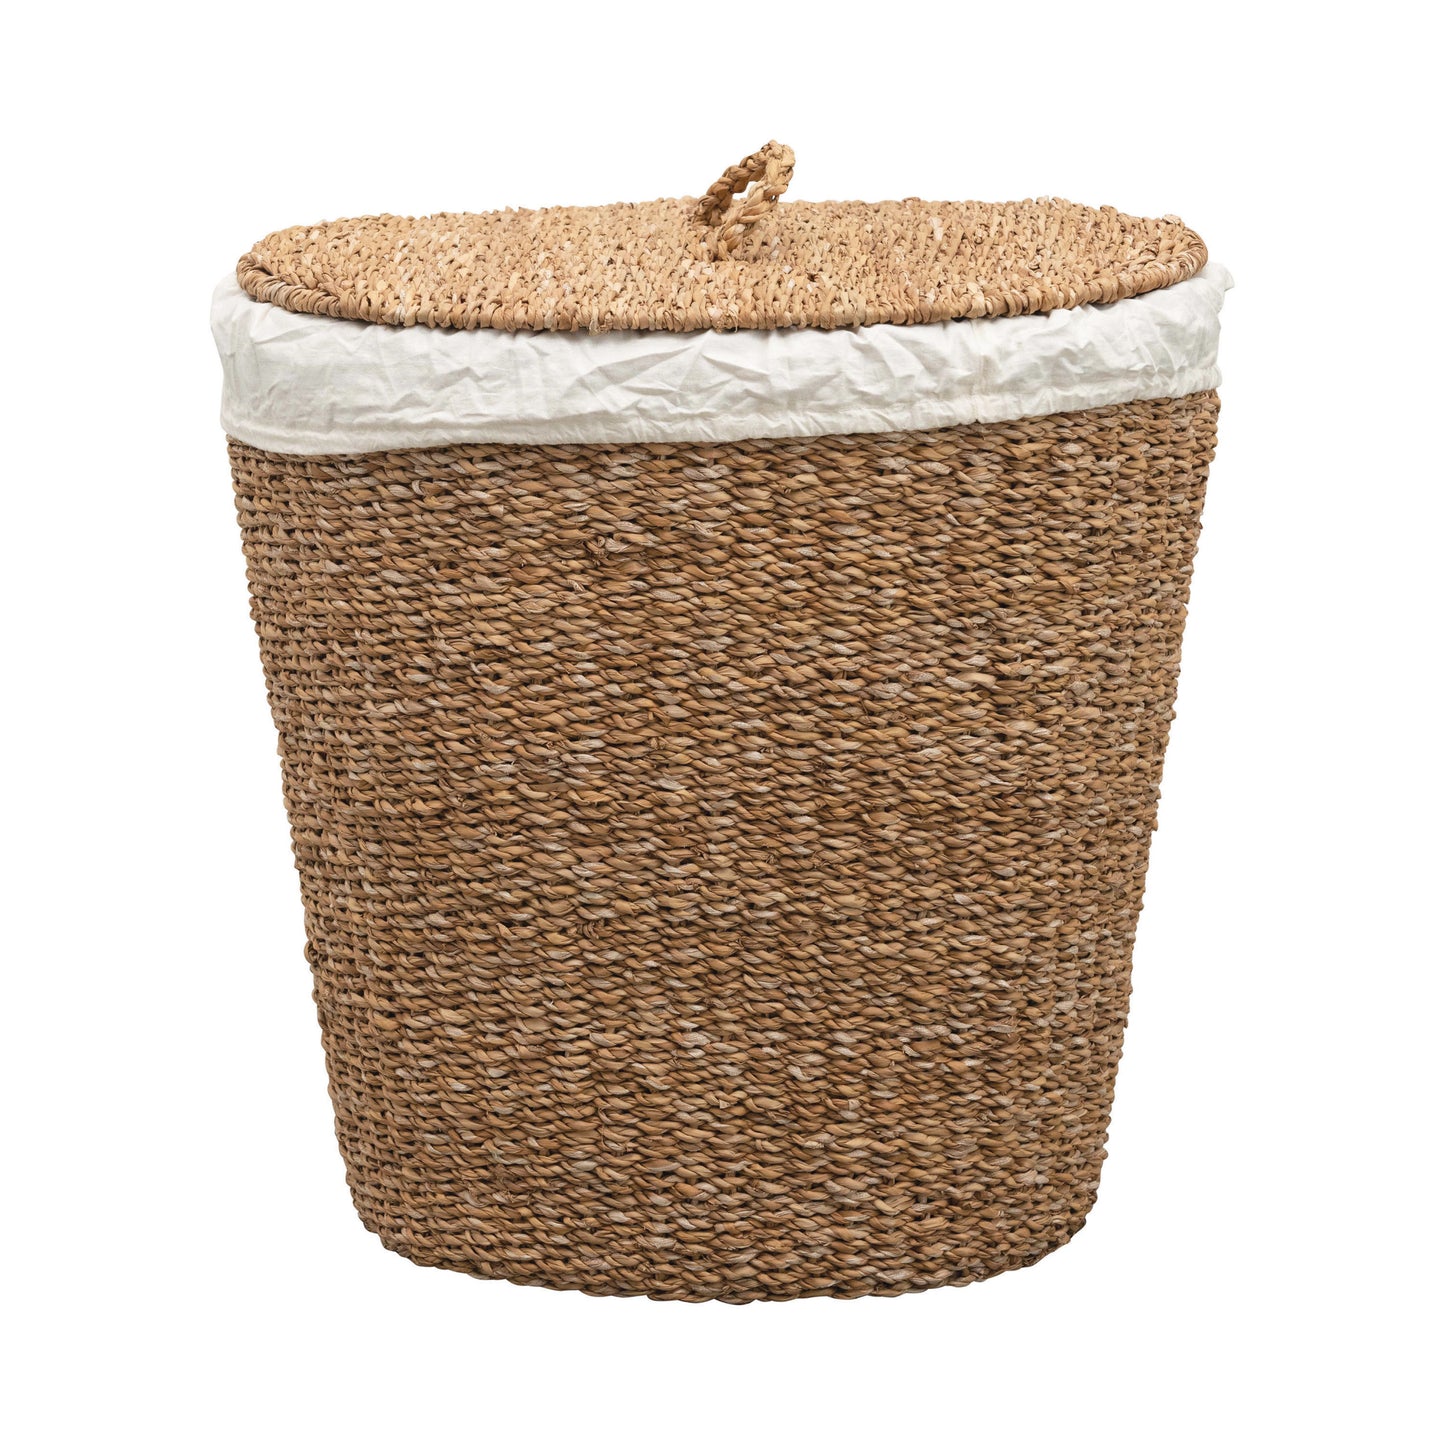 Seagrass Oval Laundry Basaket